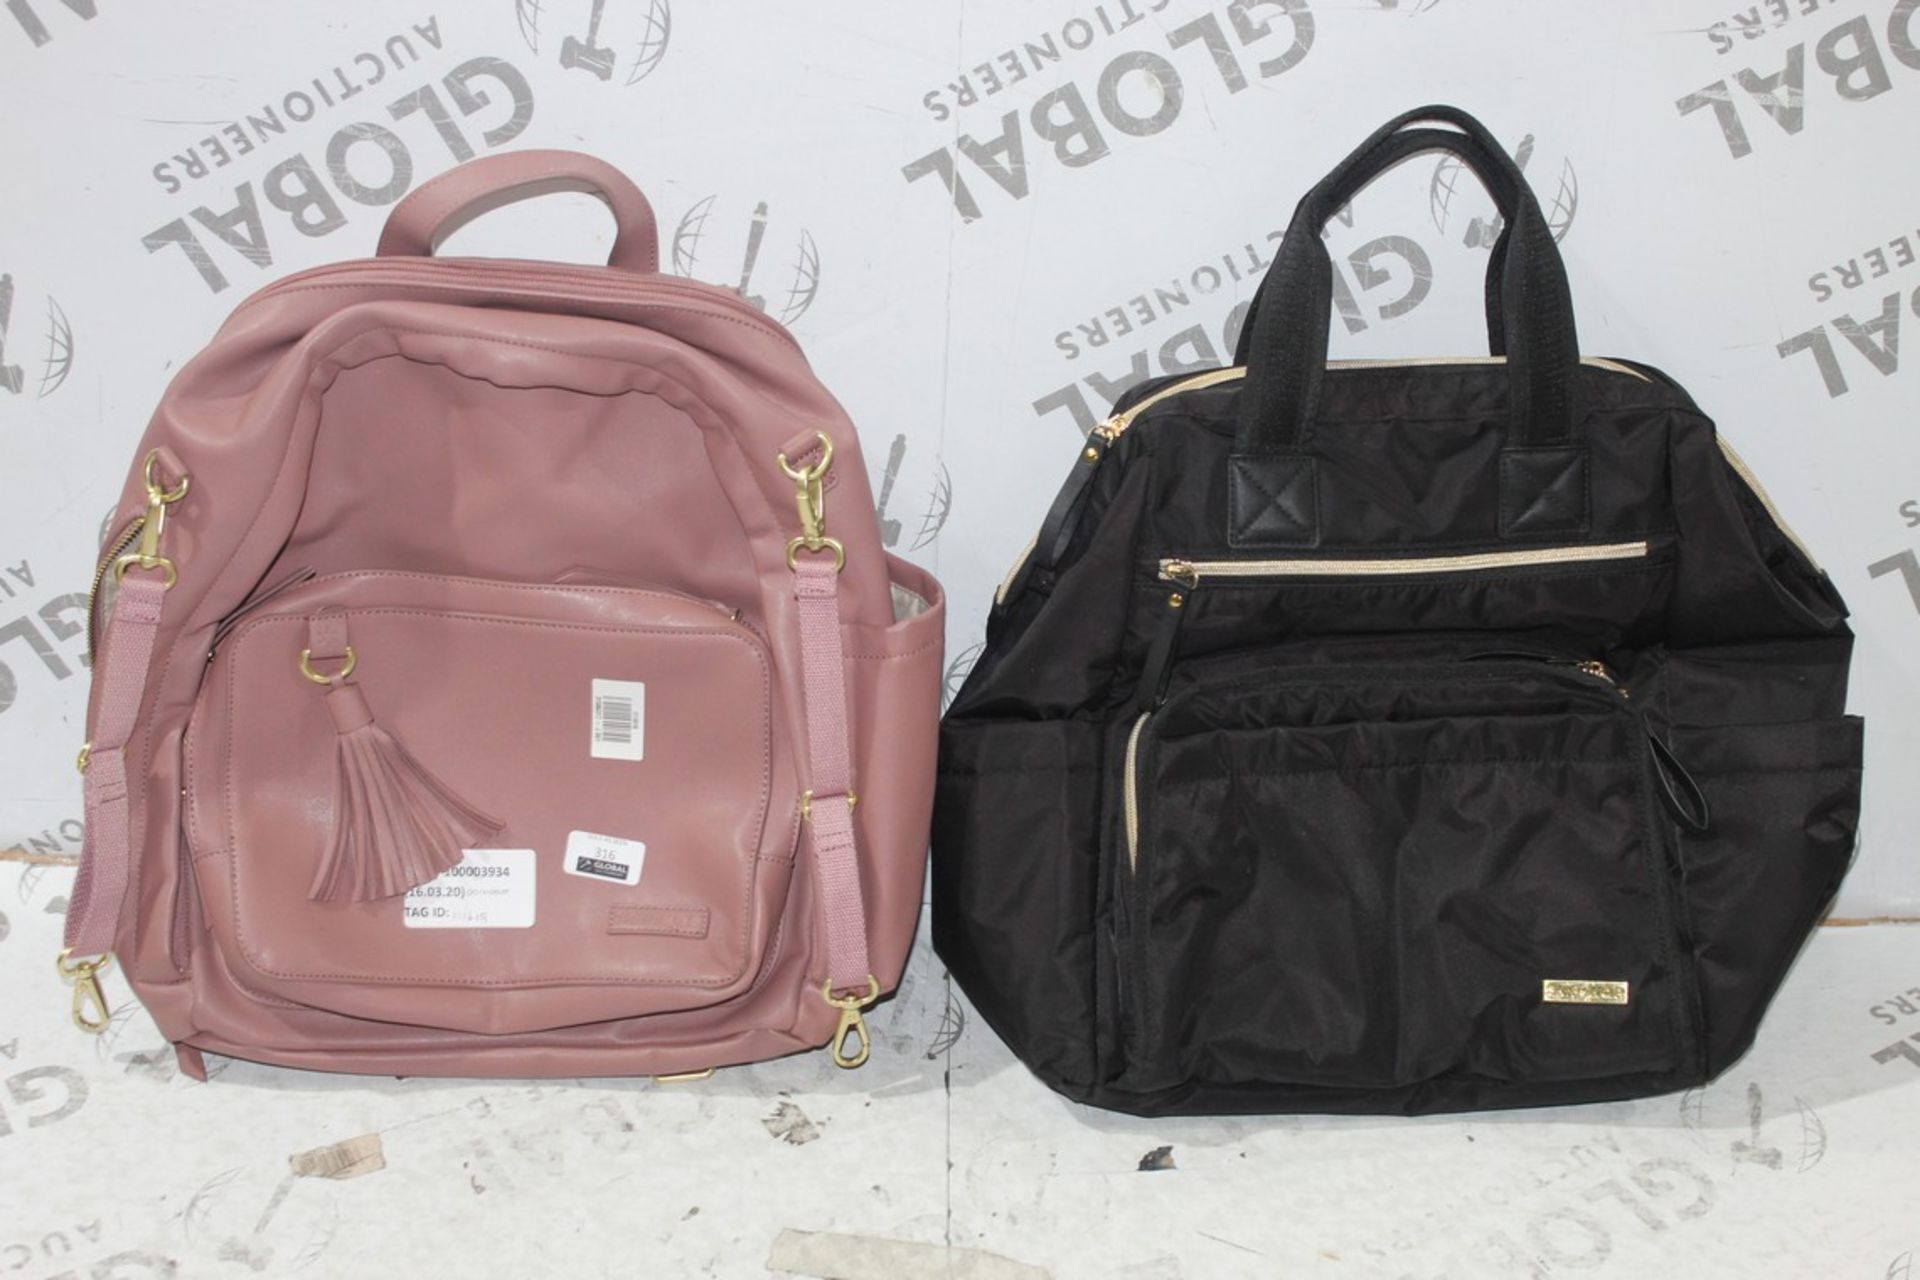 Assorted Changing Bags and Backpacks RRP £80-£100 Each (111649) (104171) (Appraisals Available)